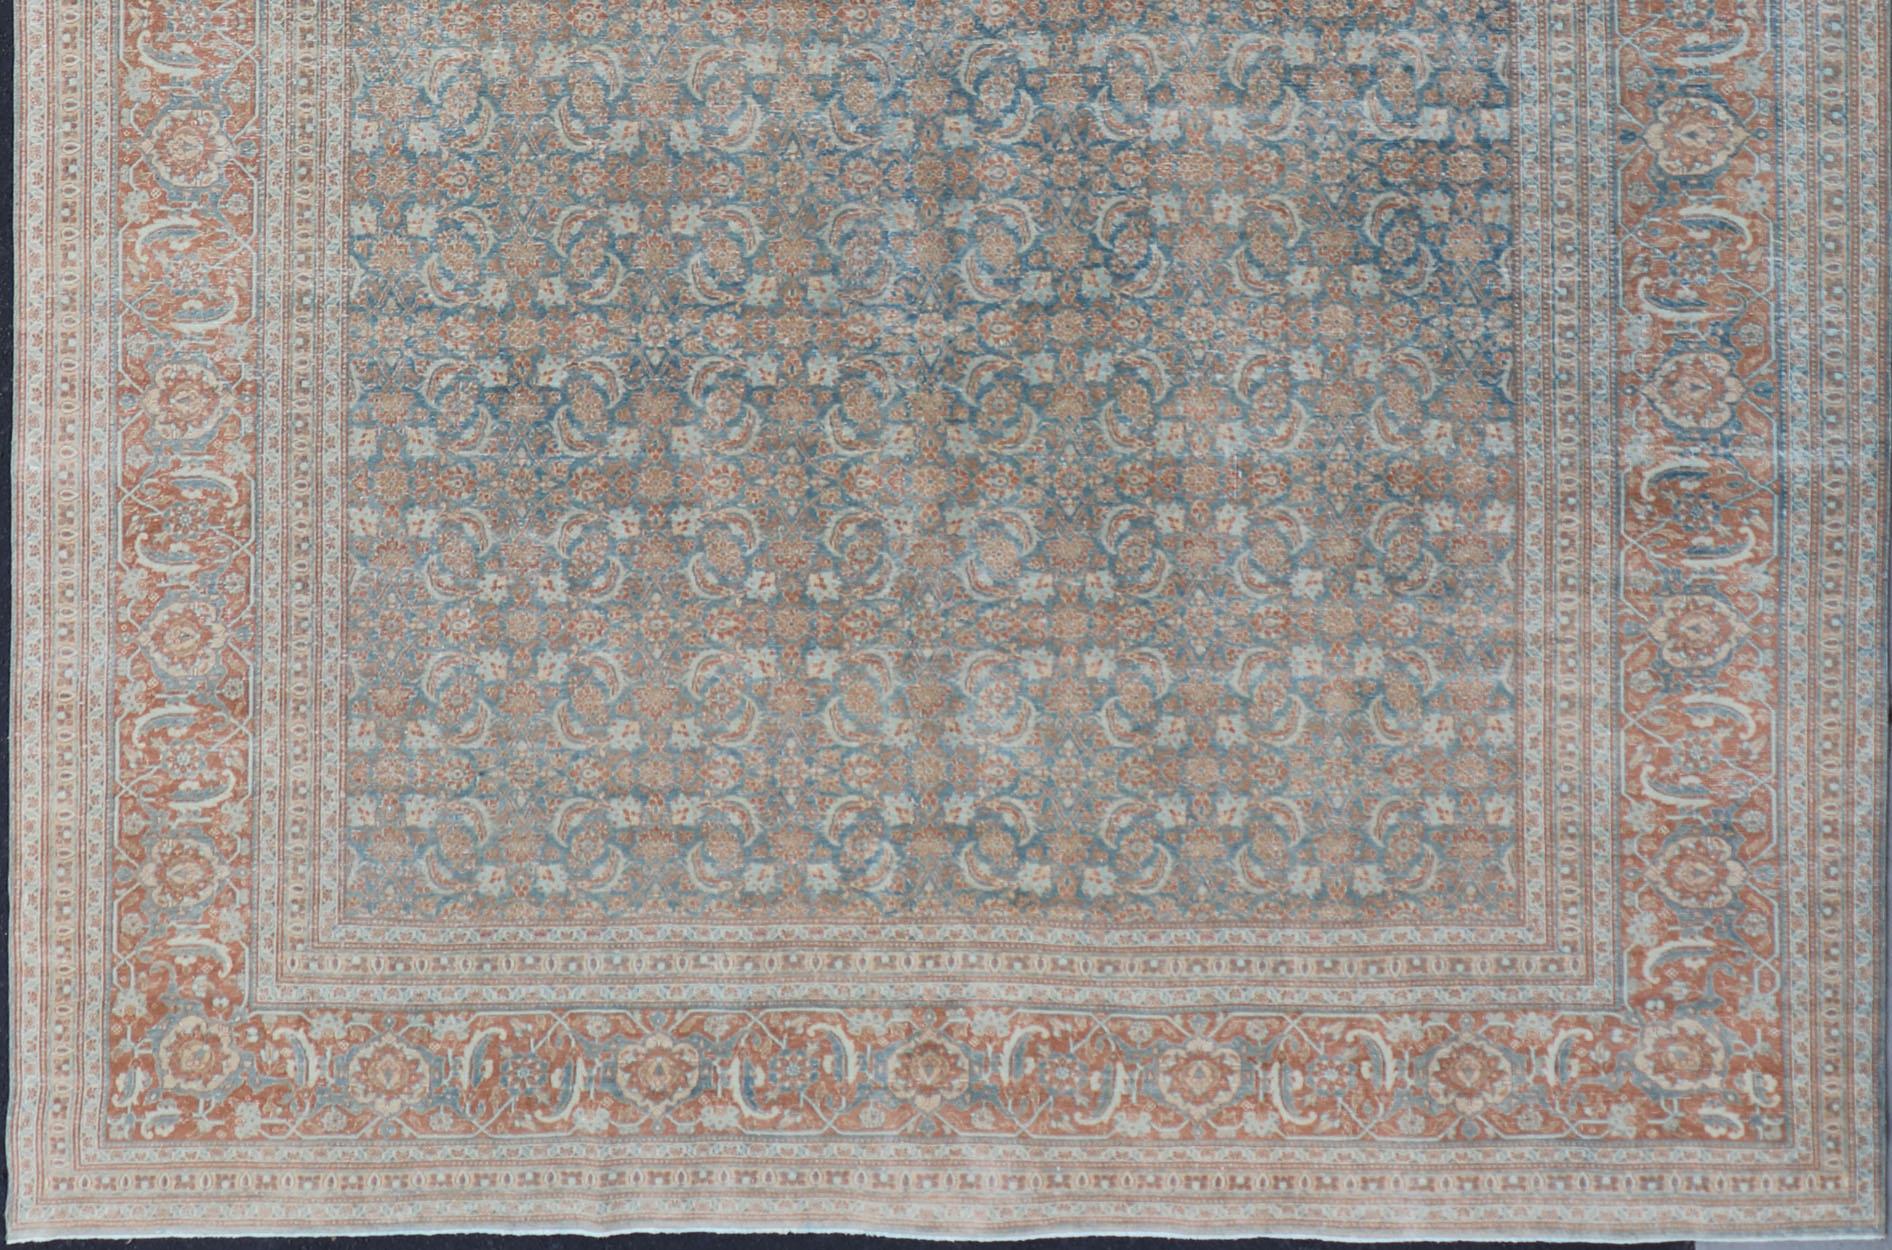 Antique Persian large distressed Tabriz rug with all over Herati and geometric design in blue tones. Blue, gray, orange red, taupe, tan and brown geometric Persian Tabriz rug, rug EMB-8514, country of origin / type: Iran / Tabriz, circa